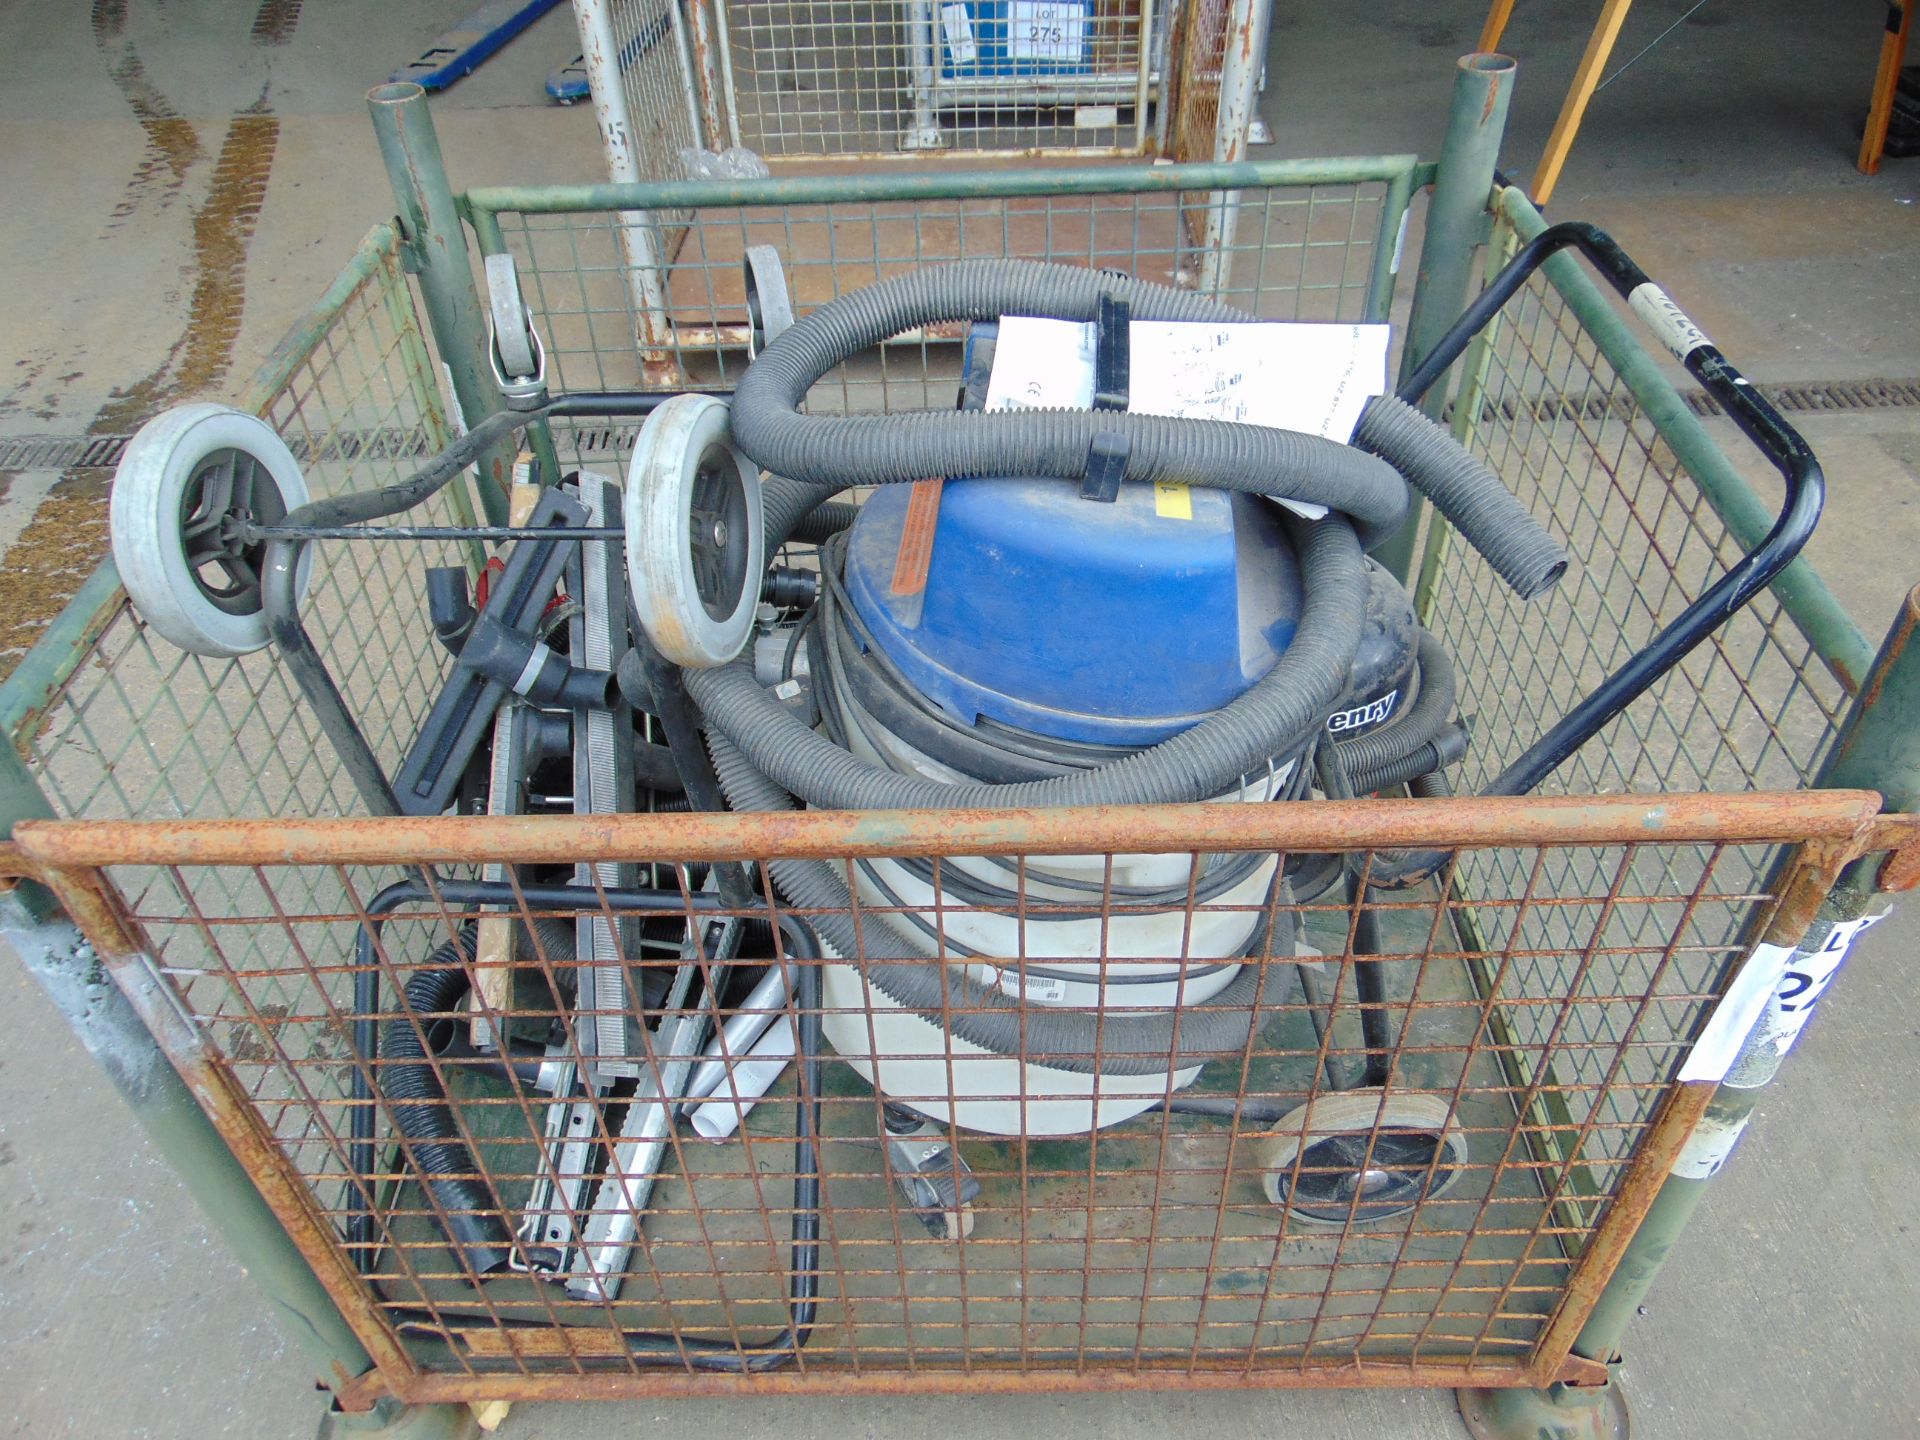 1 x Euroclean Shop Vacuum & Henry Vacuum w/ Trolley, Piping, Various Attachments etc. - Image 11 of 11